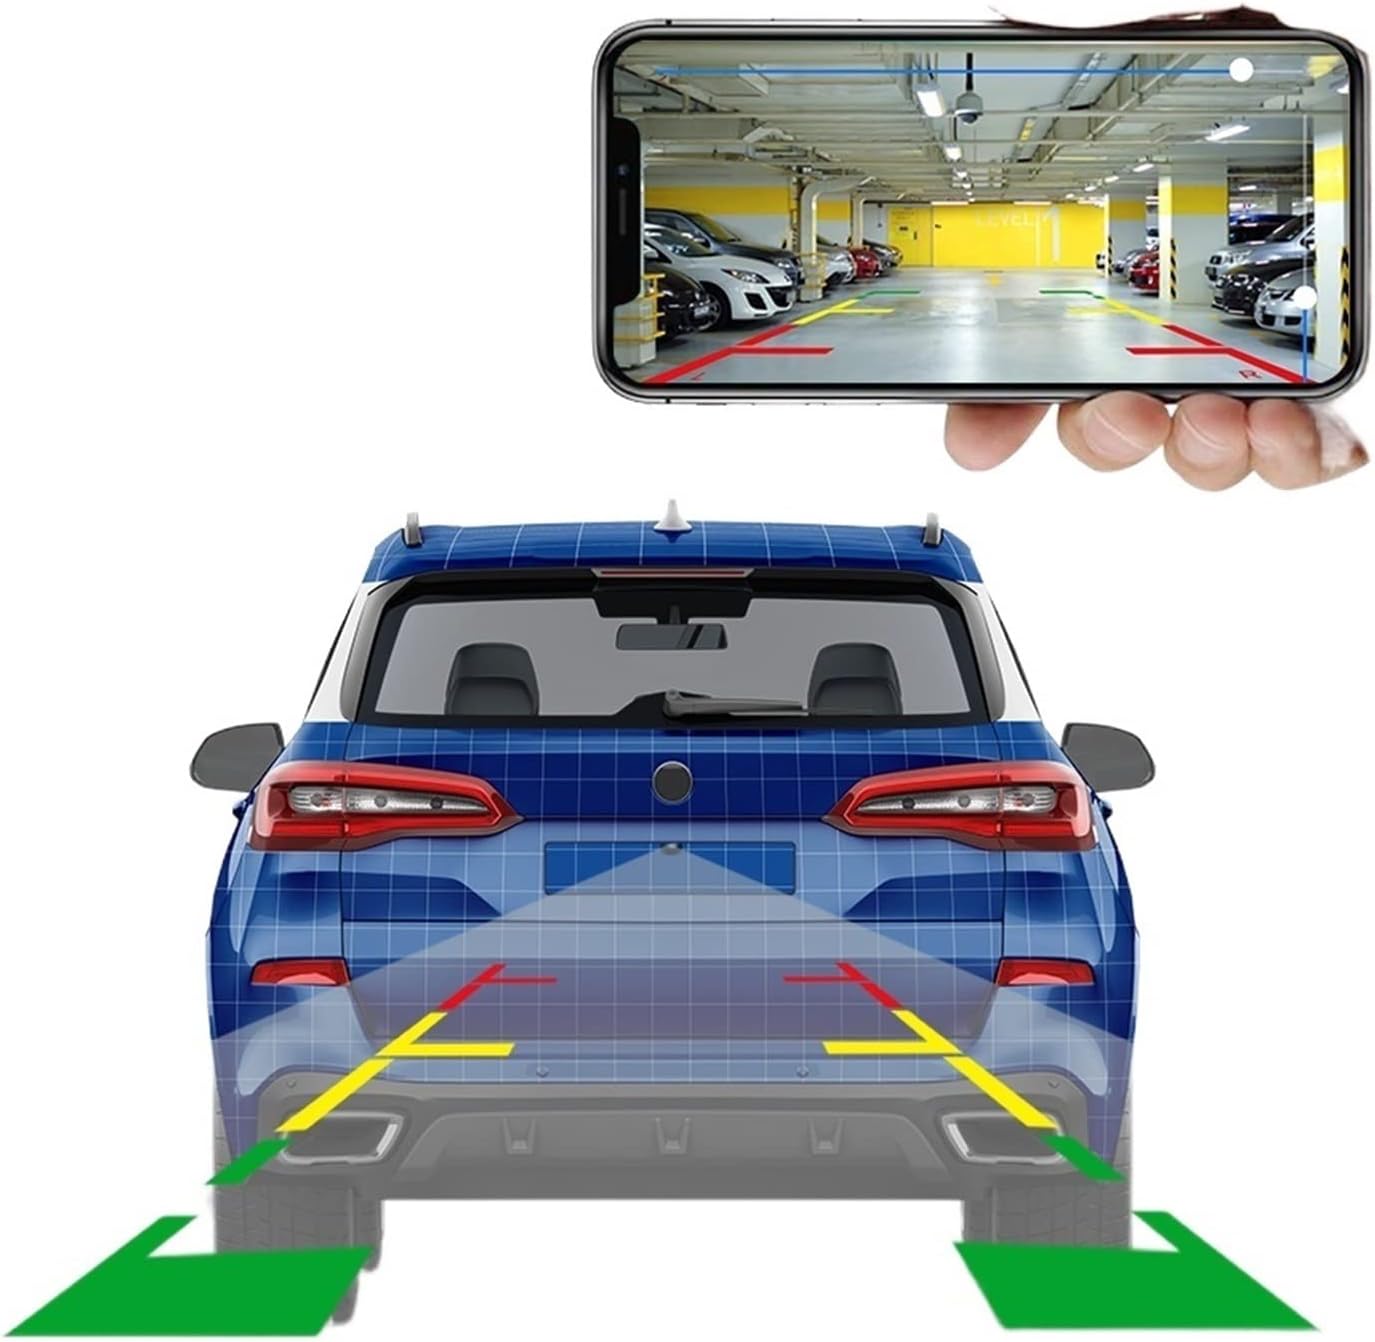 Smart World Company USB wireless reverse rear view camera to use it in your CarPlay infotainment screen for caravan and towing